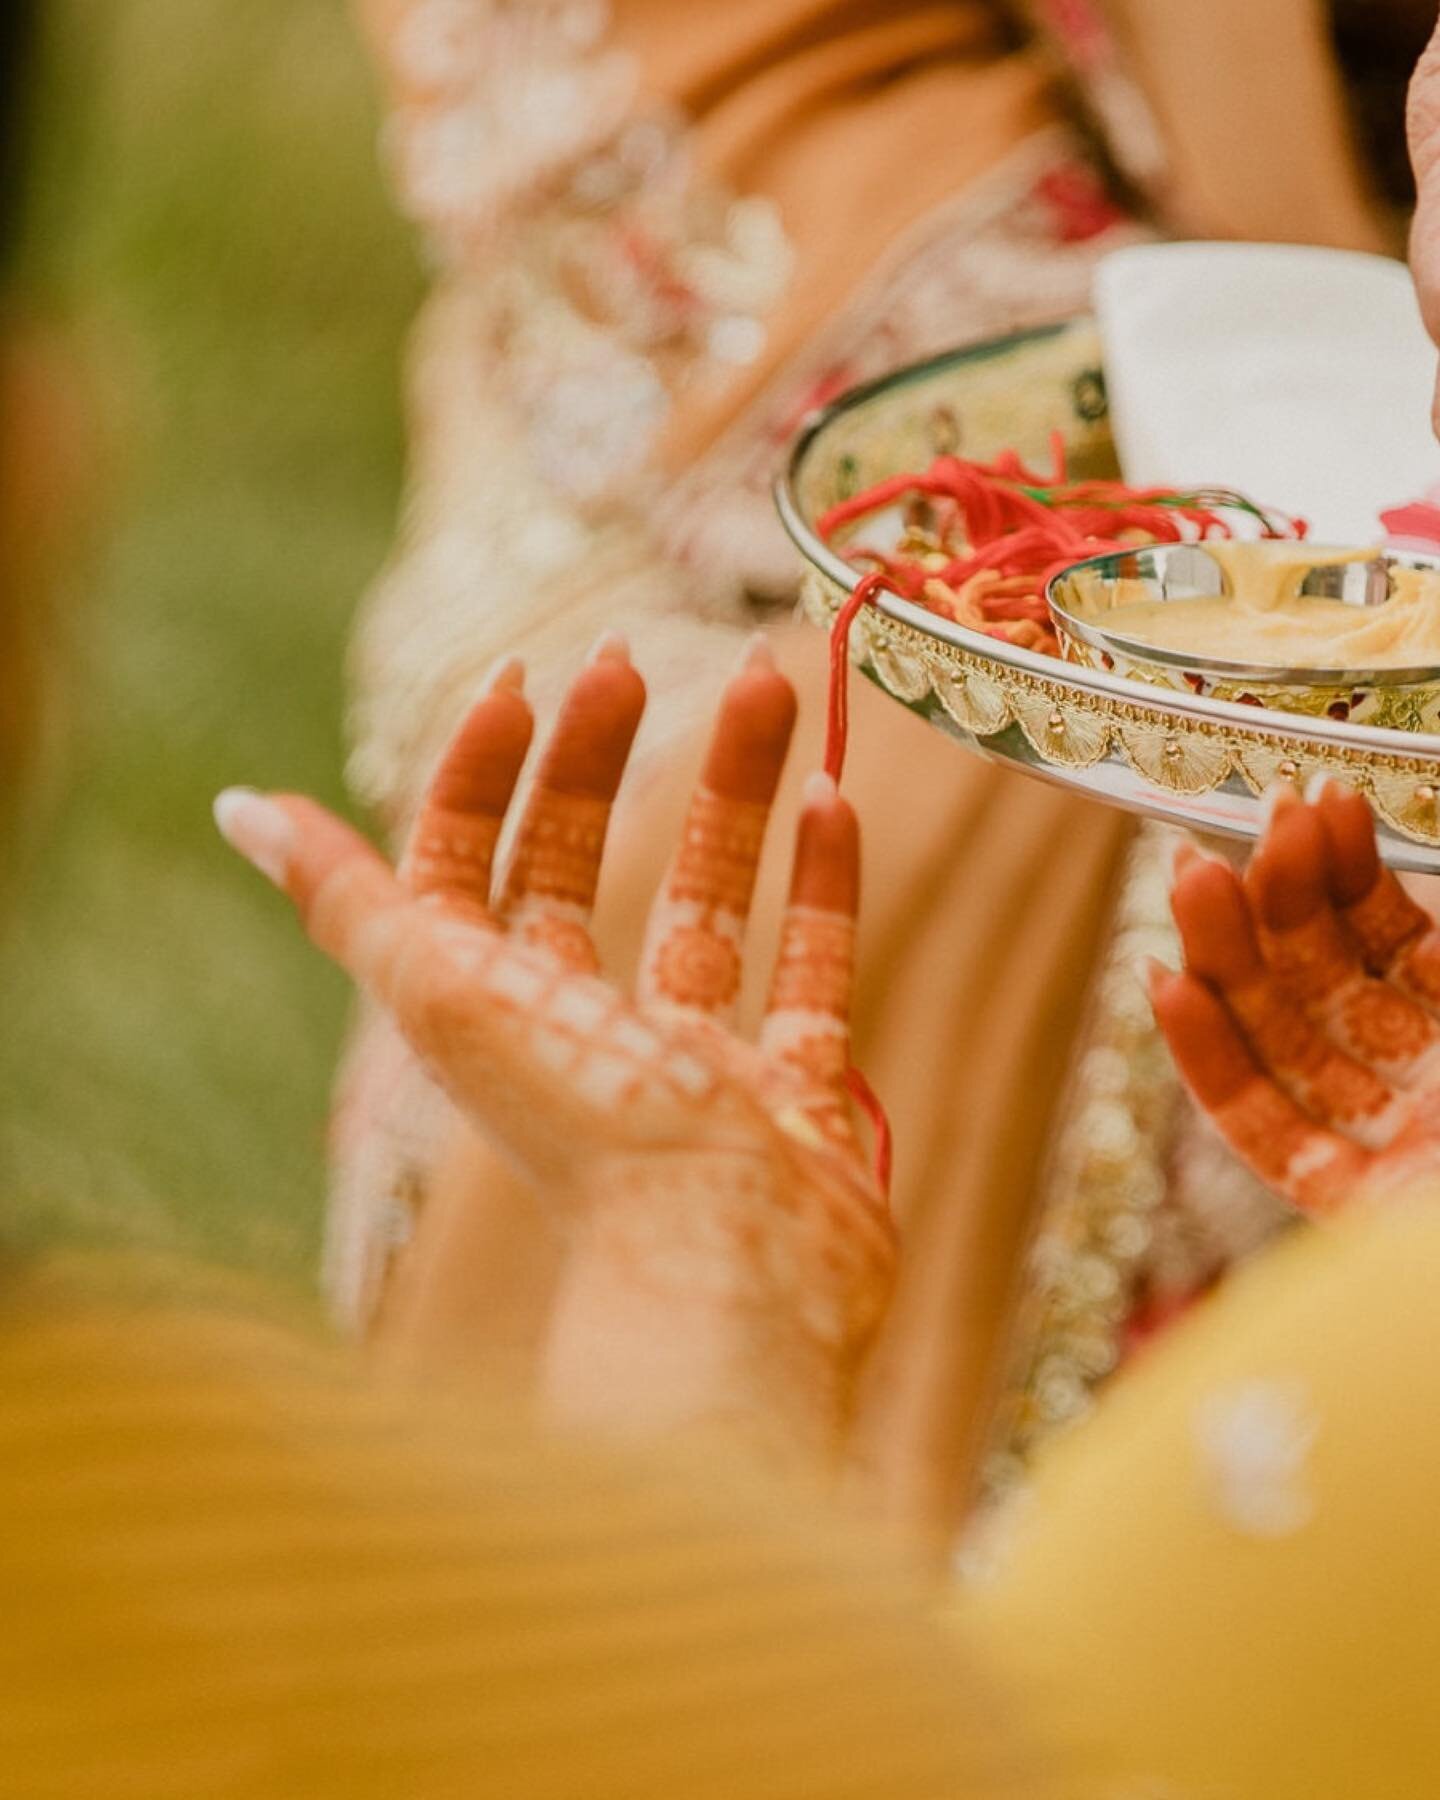 So many elements &amp; so many traditions! My heart&rsquo;s content when I&rsquo;m bombarded with details&hellip;.AND COLOR💛

Circling back to the first few events of this multi-day coverage for Anu + Omesh. The Mehndi + Maiyan introduced me to the 